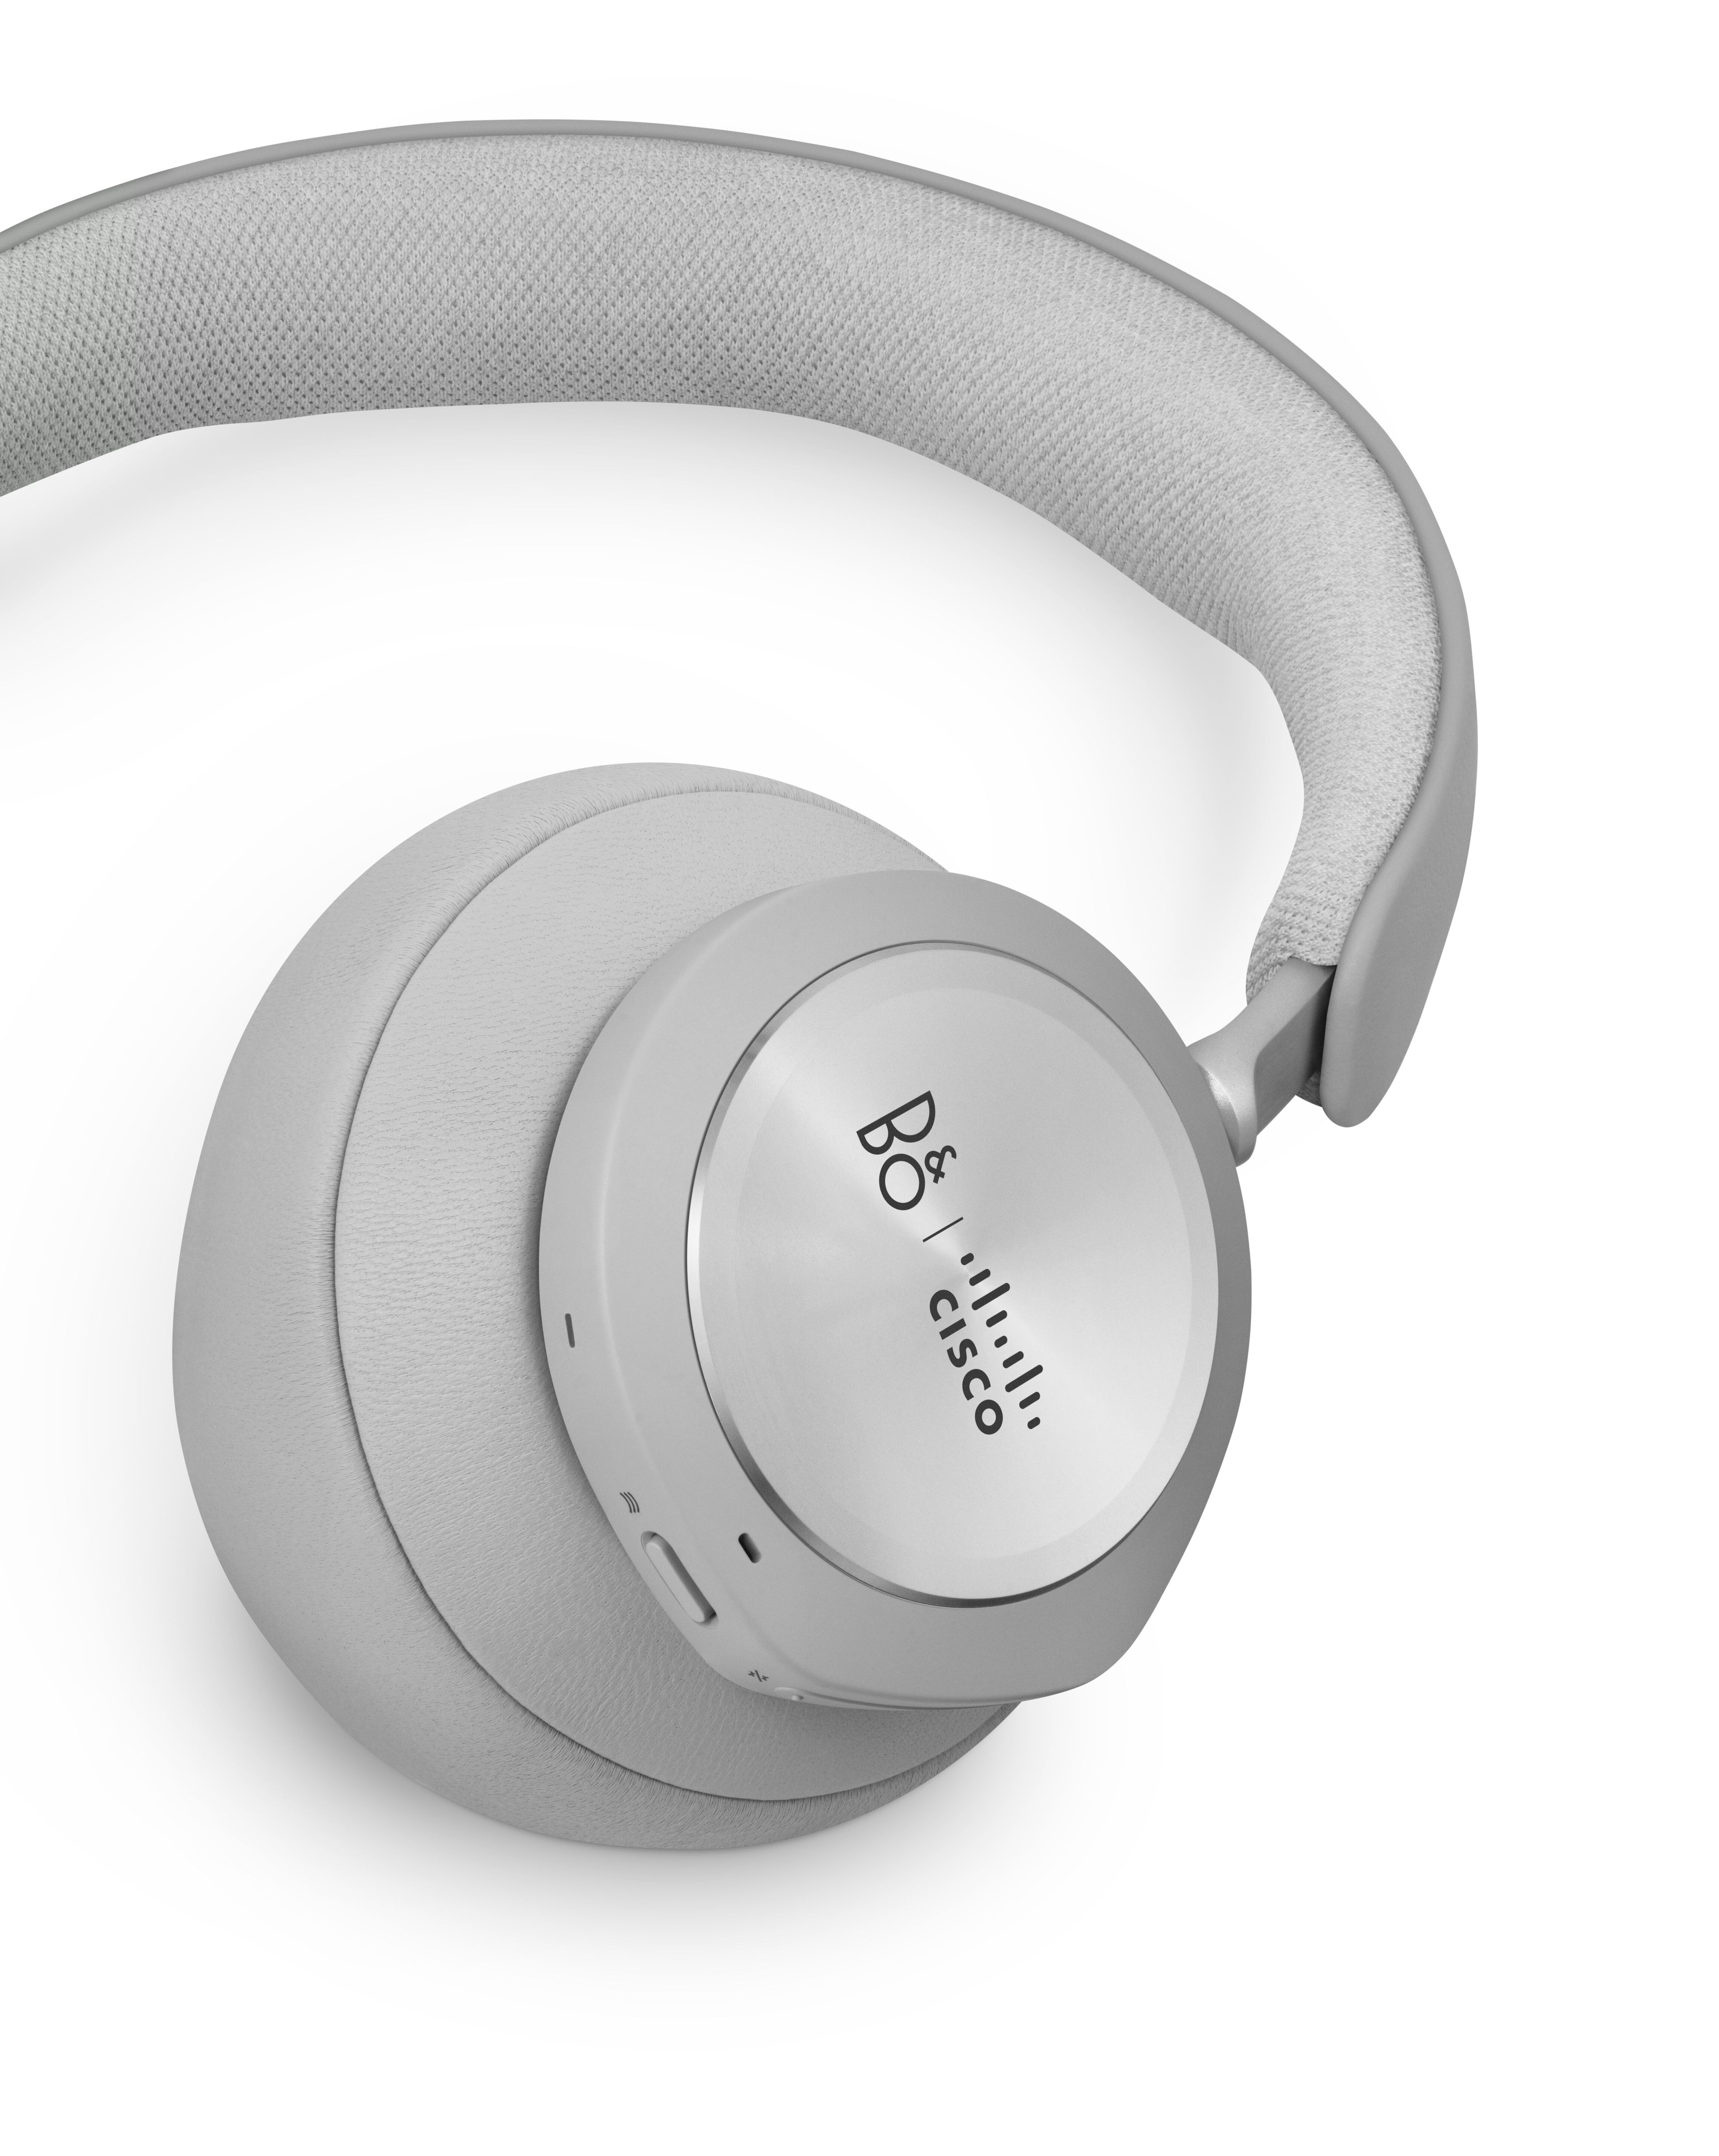 The Bang & Olufsen Cisco 980 headset. The Bang & Olufsen and Cisco logos are visible on the outside of the ear cup.